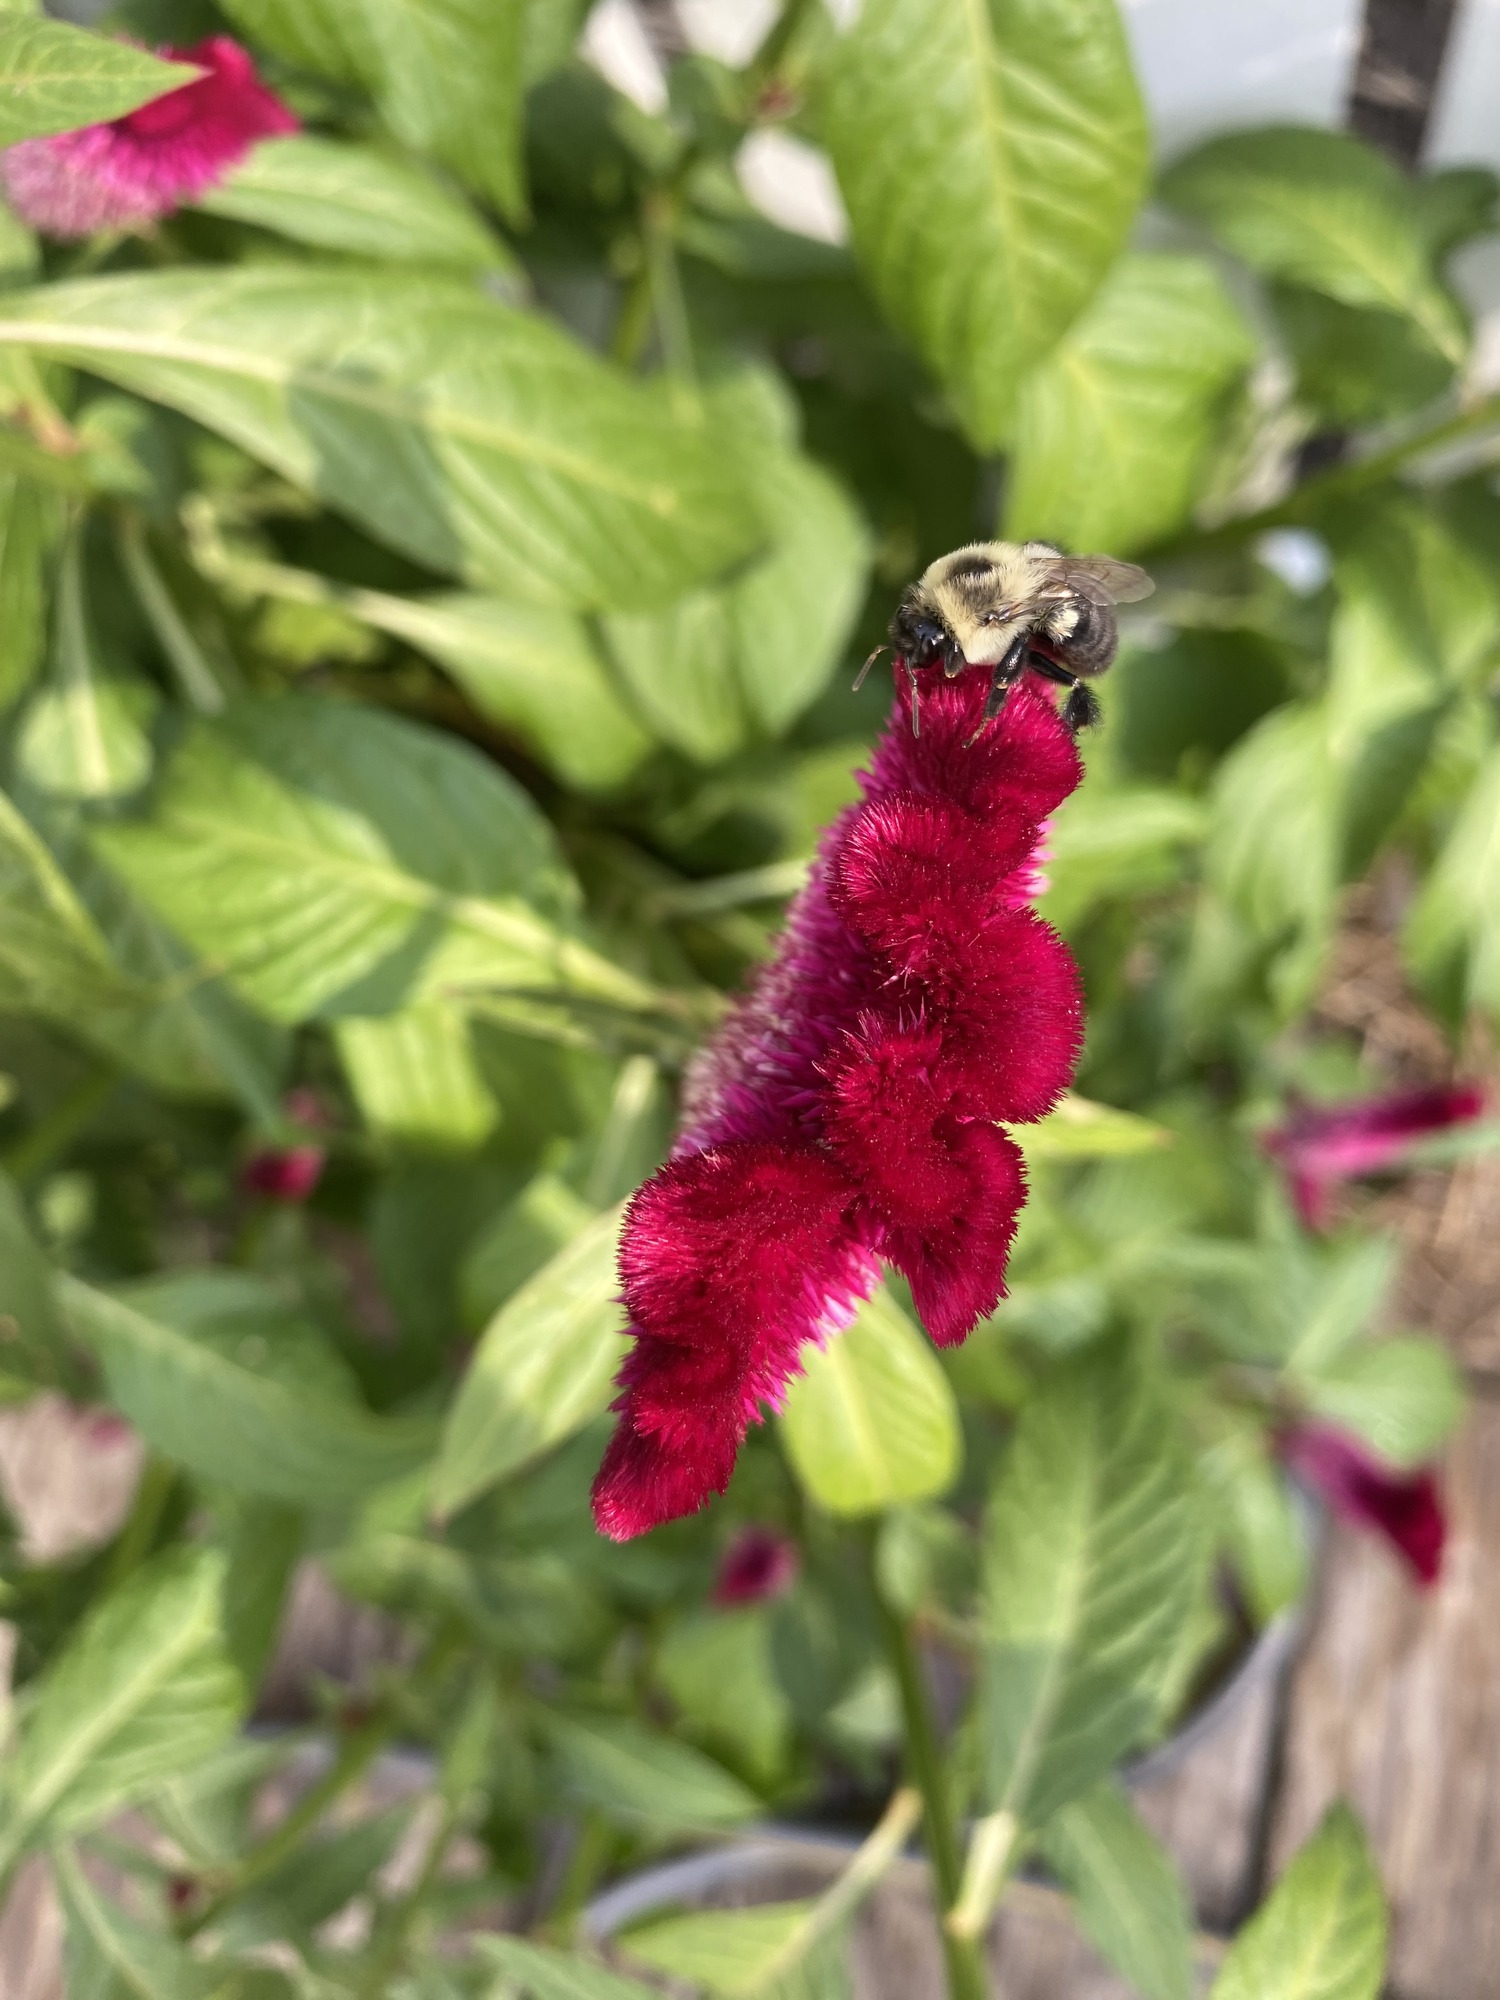 A bumble bee on a pinkish red cockscomb flower.